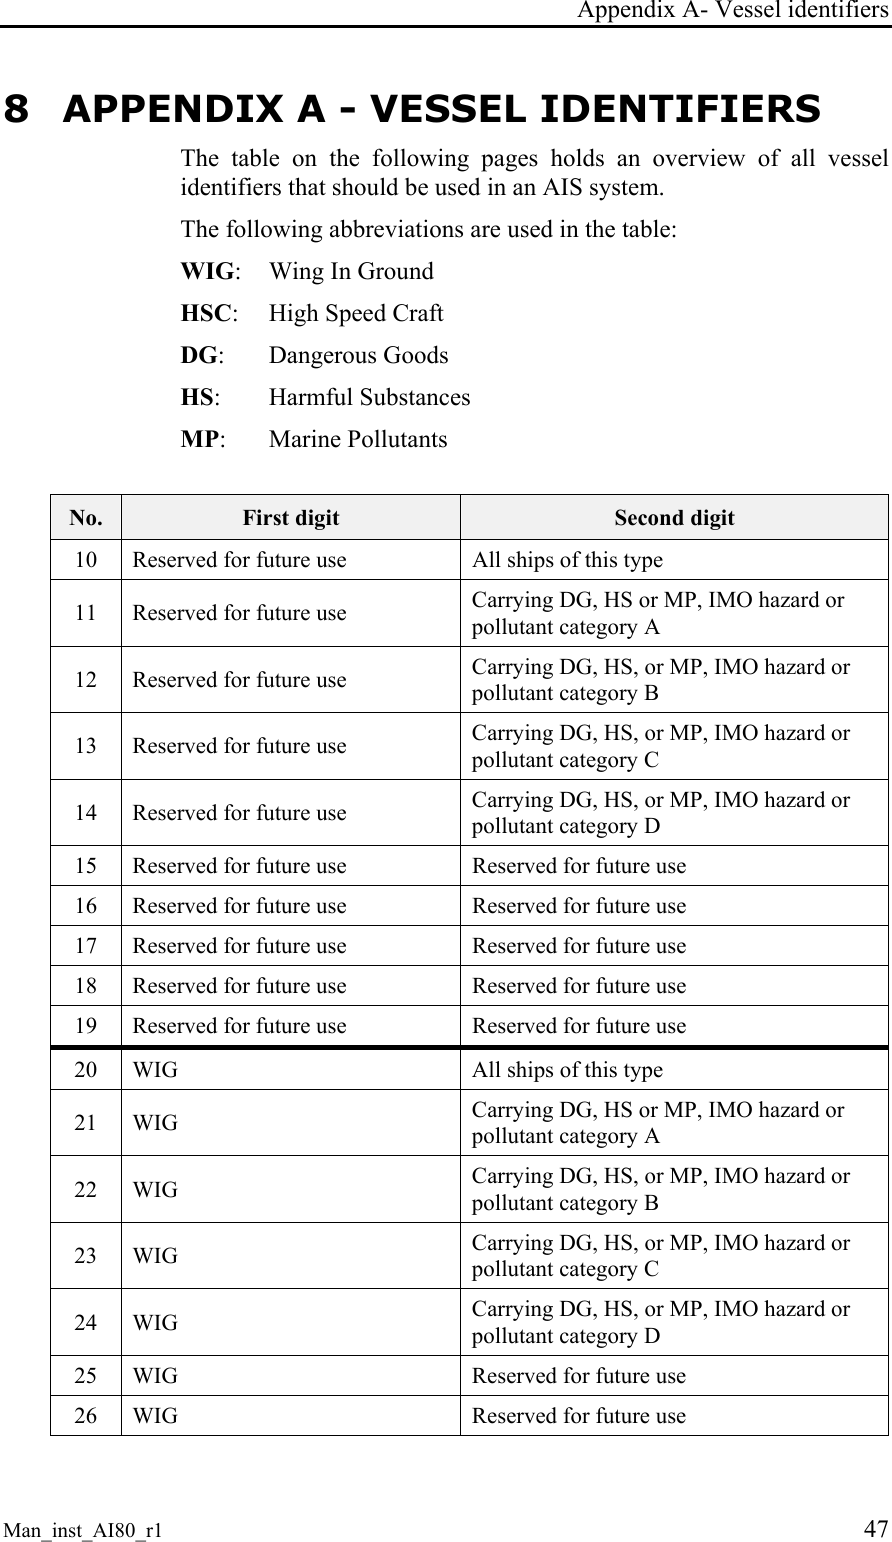 Appendix A- Vessel identifiers Man_inst_AI80_r1 47 8 APPENDIX A - VESSEL IDENTIFIERS The table on the following pages holds an overview of all vessel identifiers that should be used in an AIS system. The following abbreviations are used in the table: WIG:  Wing In Ground HSC:  High Speed Craft DG: Dangerous Goods HS:   Harmful Substances MP: Marine Pollutants  No.  First digit  Second digit 10  Reserved for future use  All ships of this type 11  Reserved for future use  Carrying DG, HS or MP, IMO hazard or pollutant category A 12  Reserved for future use  Carrying DG, HS, or MP, IMO hazard or pollutant category B 13  Reserved for future use  Carrying DG, HS, or MP, IMO hazard or pollutant category C 14  Reserved for future use  Carrying DG, HS, or MP, IMO hazard or pollutant category D 15  Reserved for future use  Reserved for future use 16  Reserved for future use  Reserved for future use 17  Reserved for future use  Reserved for future use 18  Reserved for future use  Reserved for future use 19  Reserved for future use  Reserved for future use 20  WIG  All ships of this type 21 WIG  Carrying DG, HS or MP, IMO hazard or pollutant category A 22 WIG  Carrying DG, HS, or MP, IMO hazard or pollutant category B 23 WIG  Carrying DG, HS, or MP, IMO hazard or pollutant category C 24 WIG  Carrying DG, HS, or MP, IMO hazard or pollutant category D 25  WIG  Reserved for future use 26  WIG  Reserved for future use 